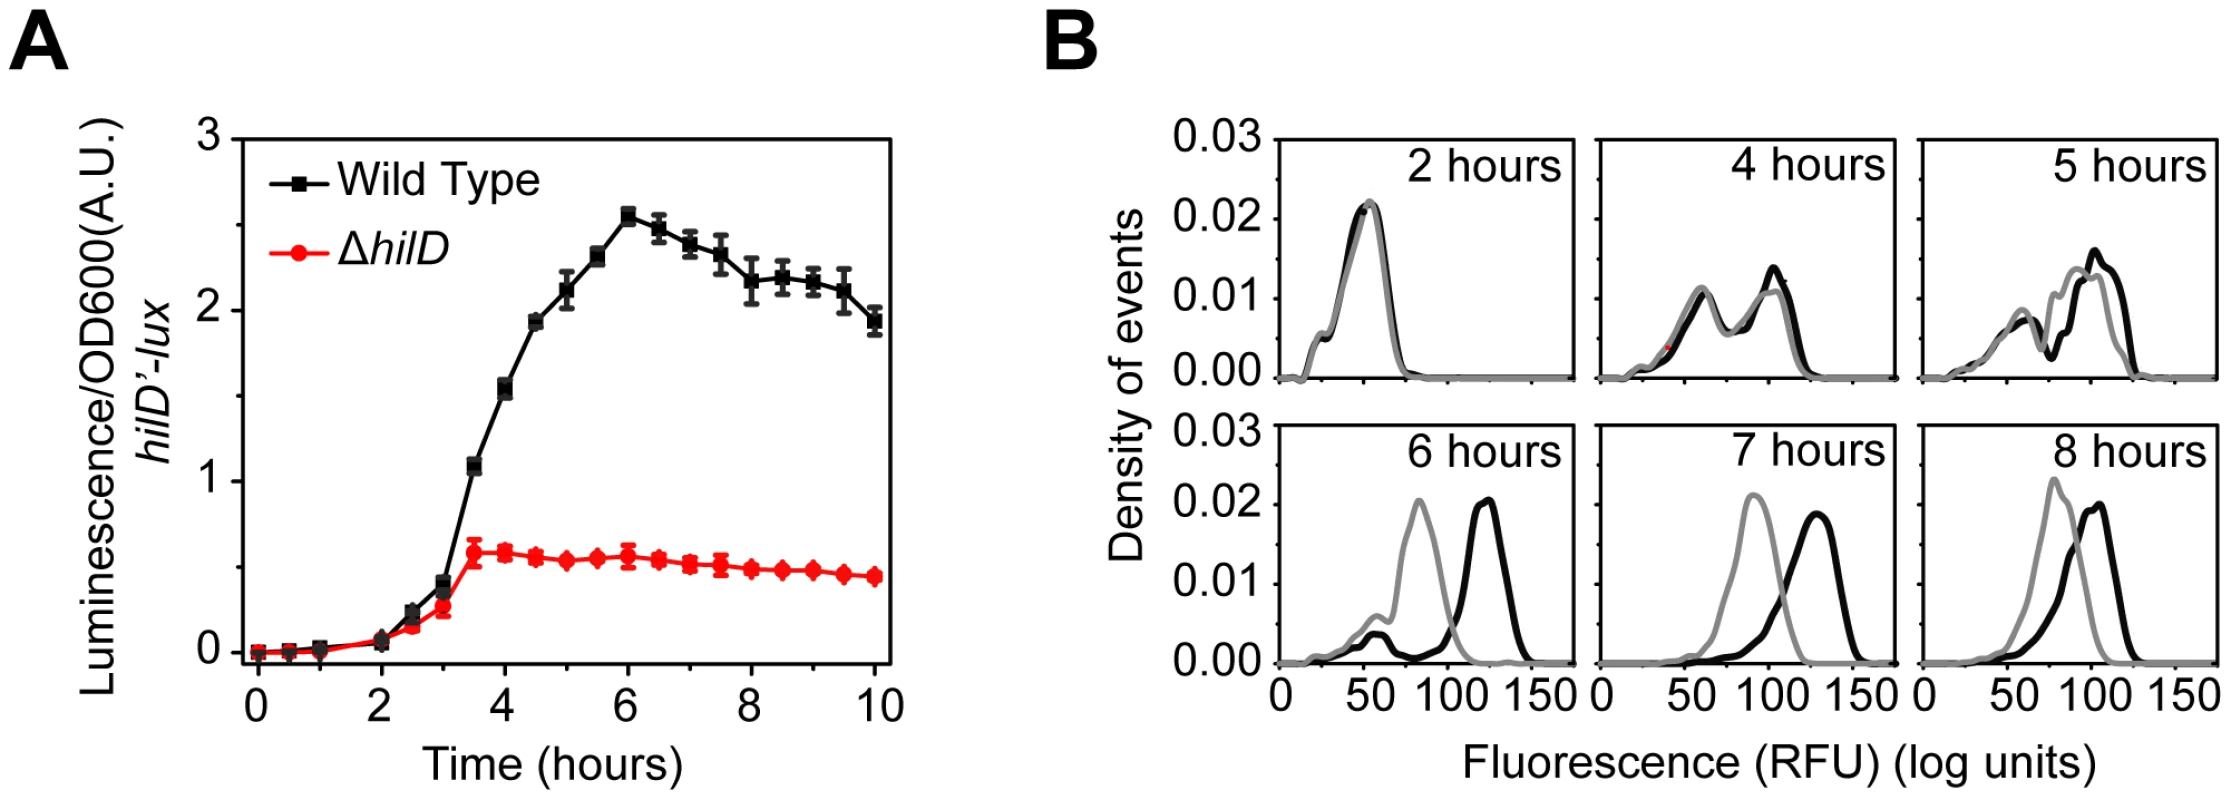 SPI1 gene expression is induced by a step increase in P<i><sub>hilD</sub></i> promoter activity.